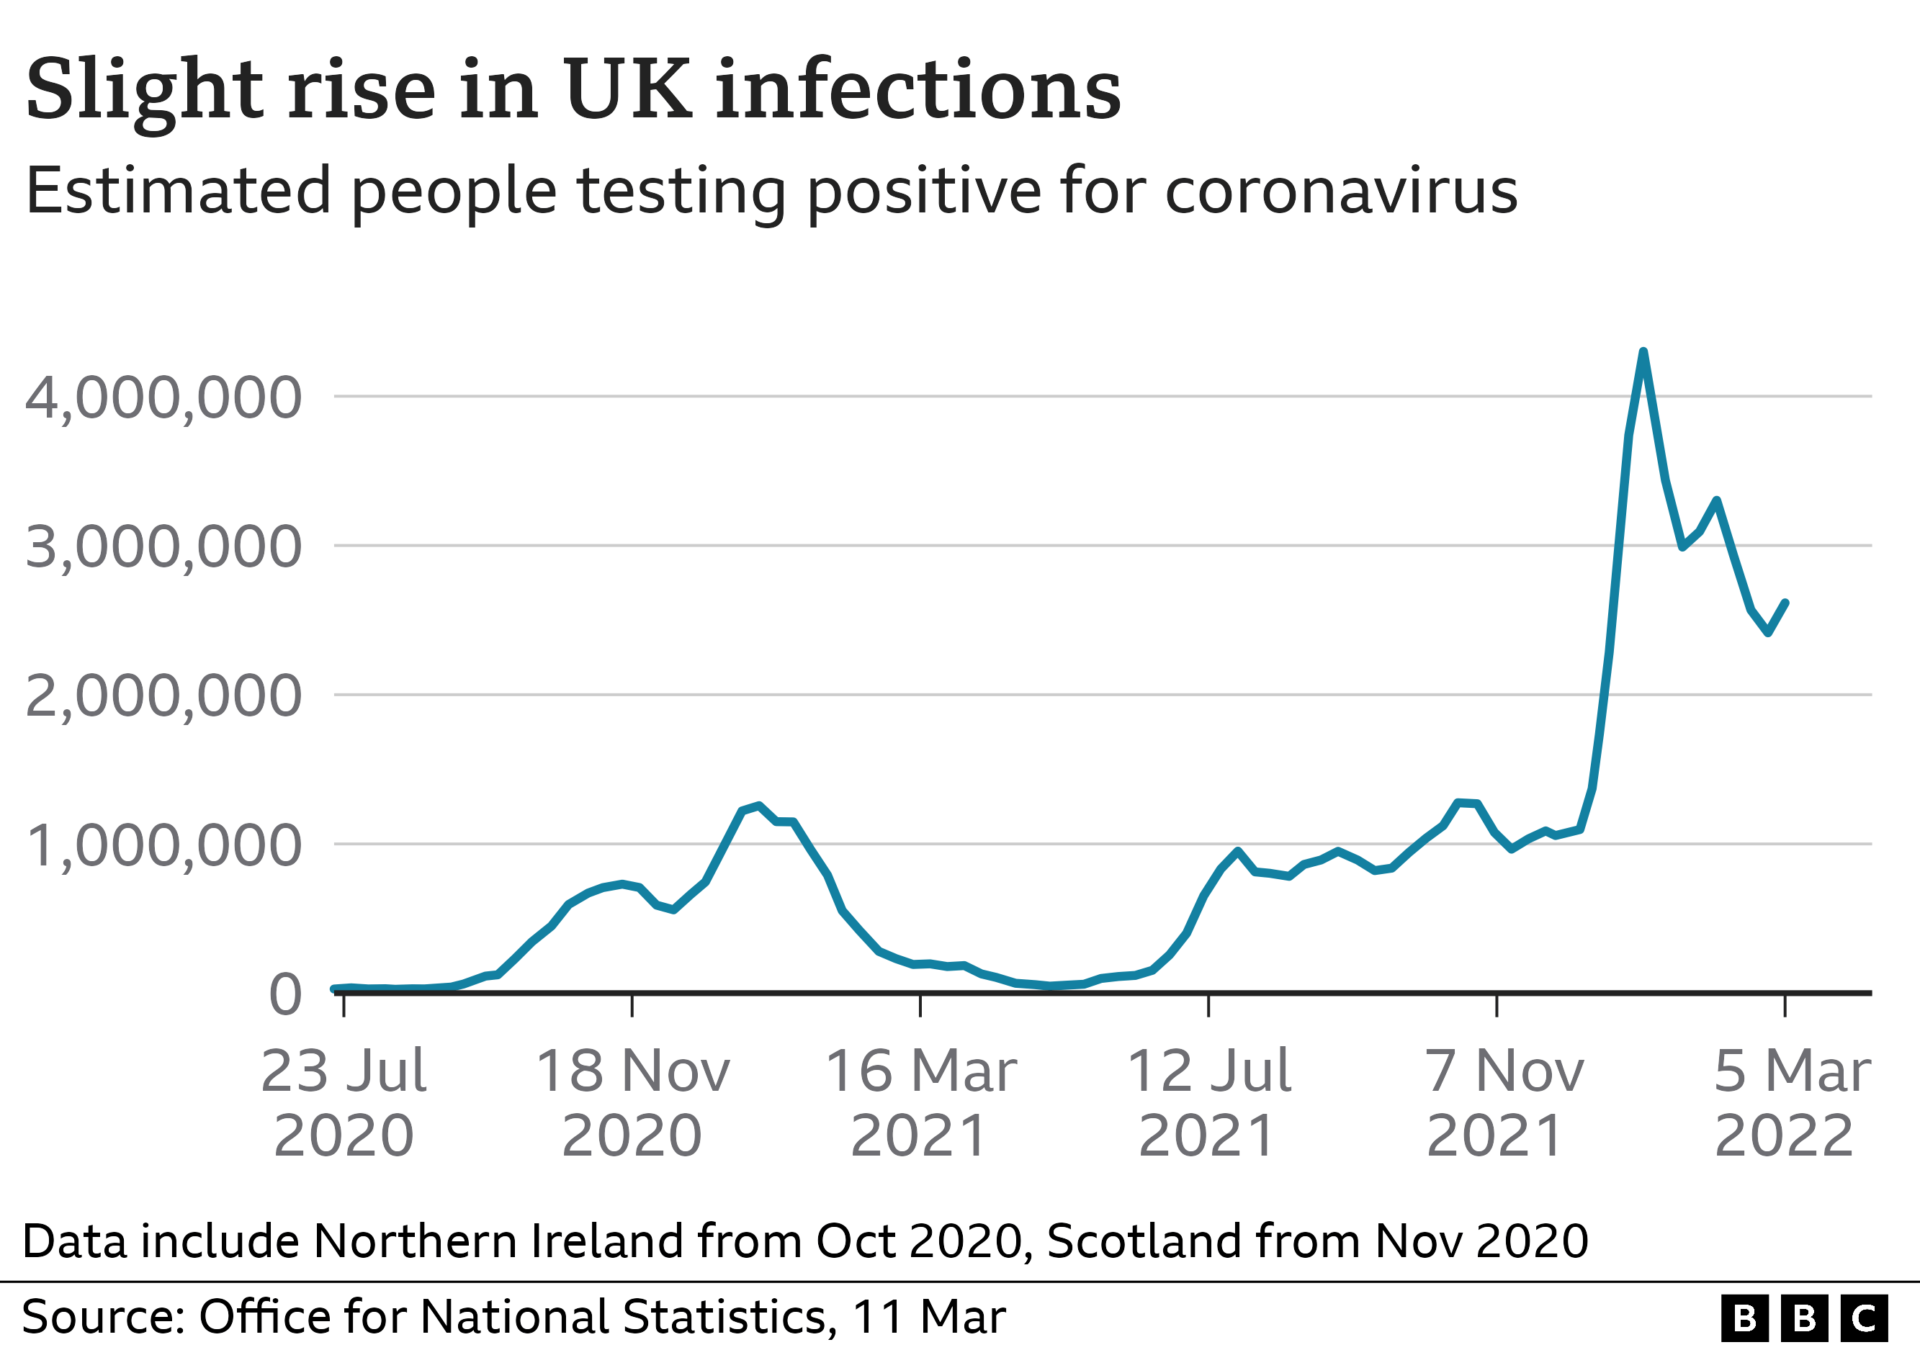 Graph showing a rise in Covid infections in the UK since the end of February